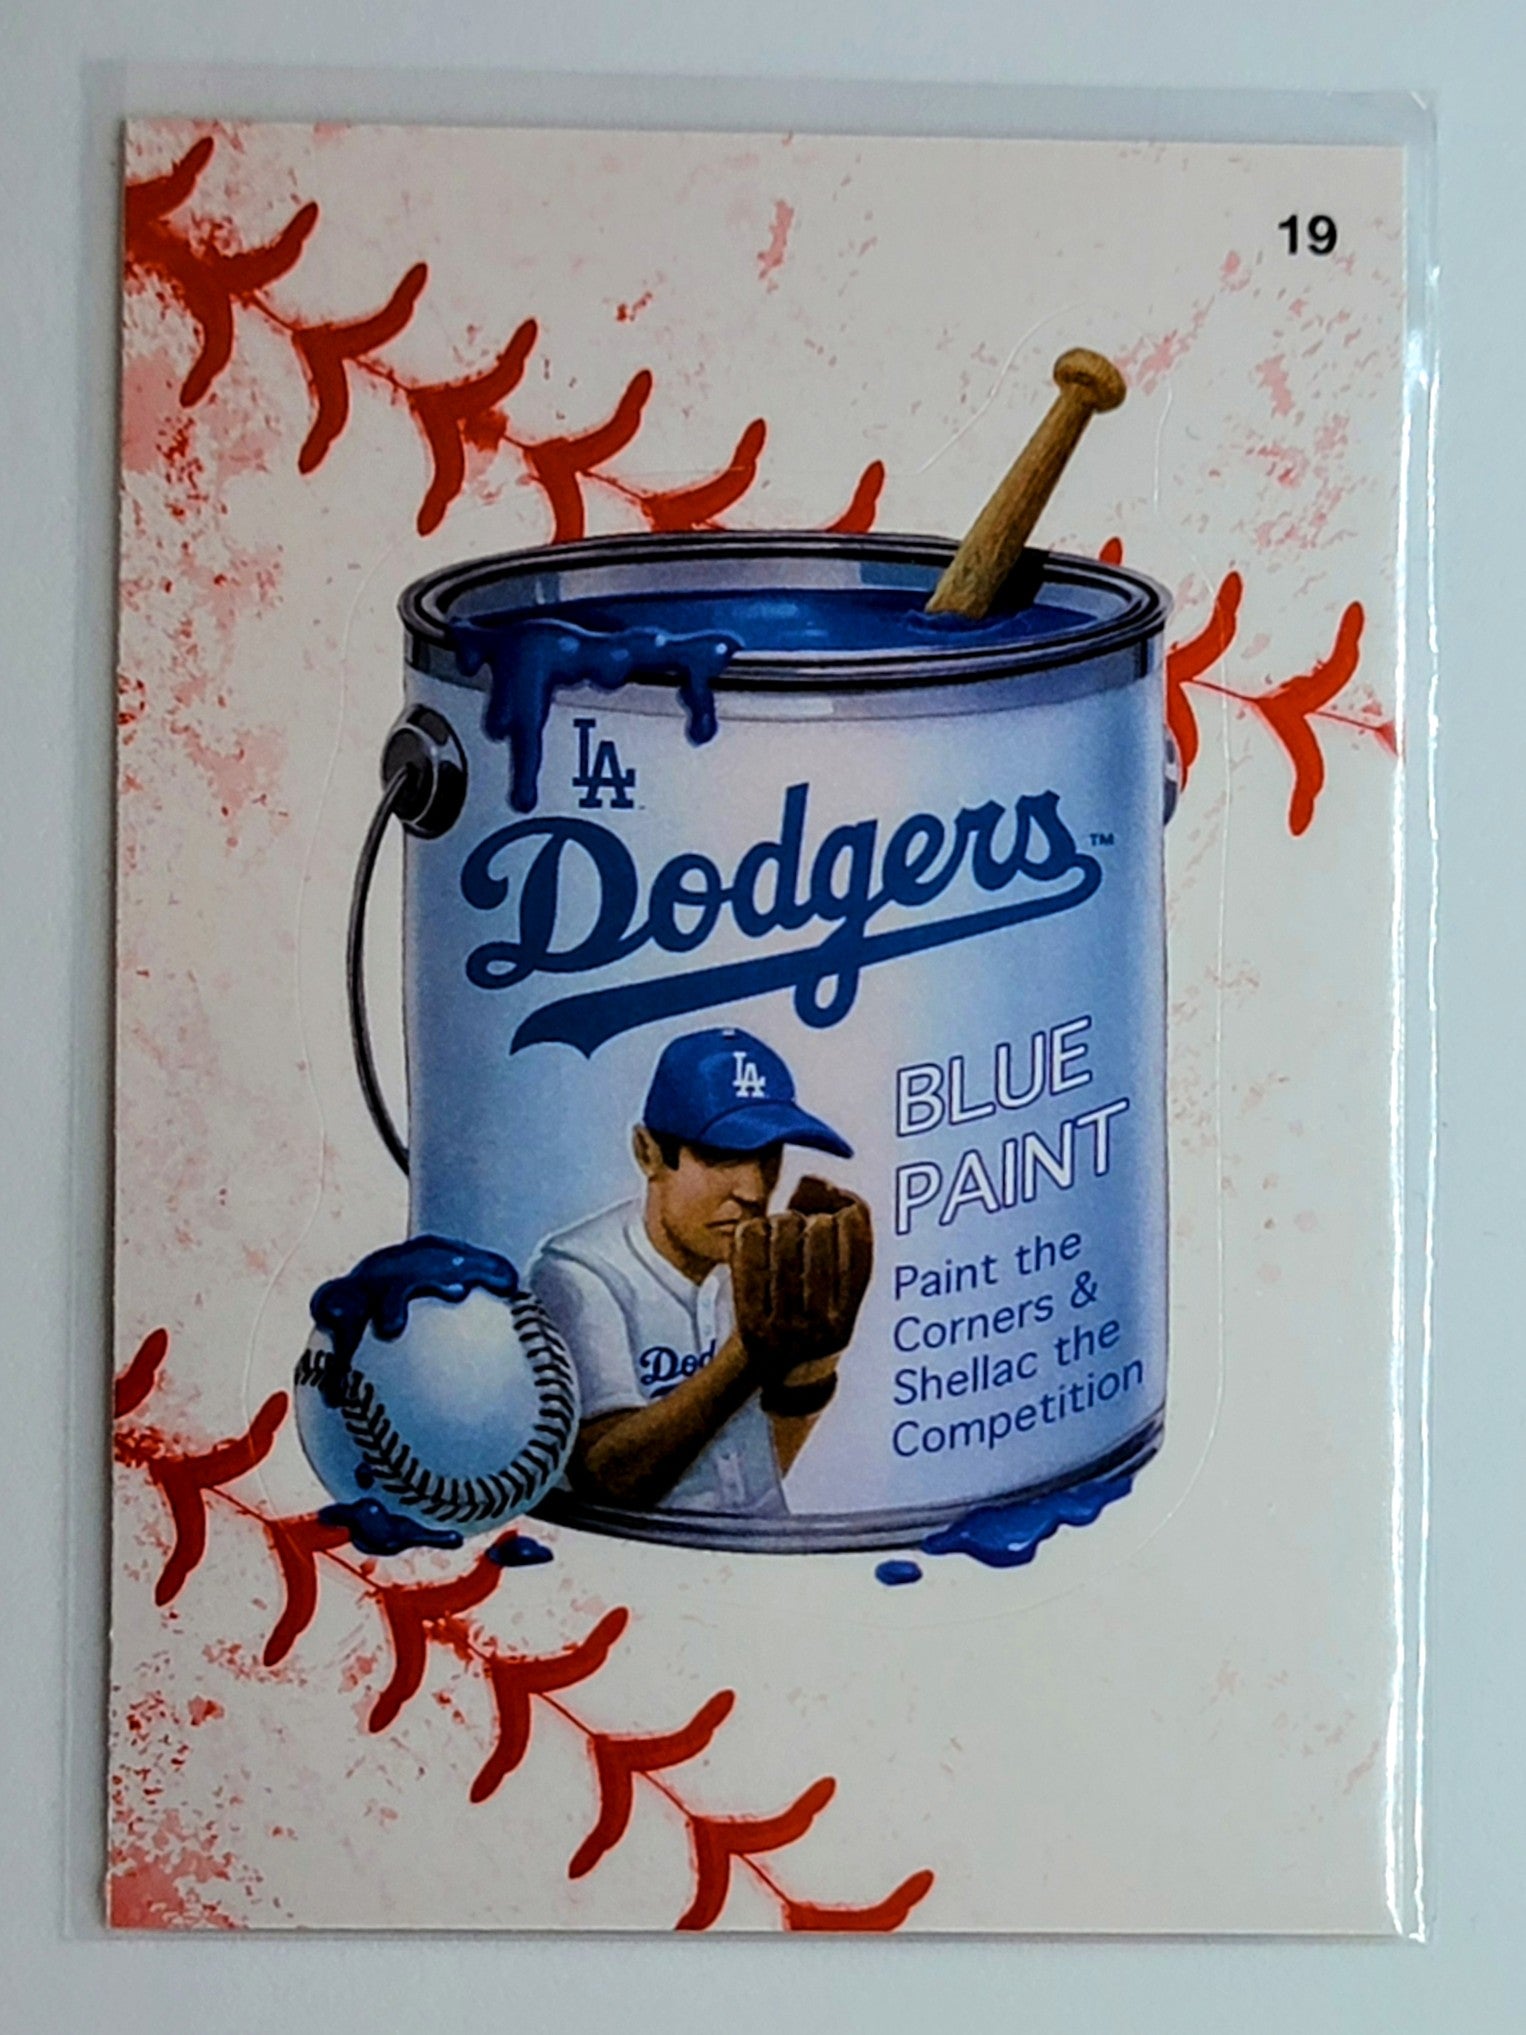 2016 Topps MLB Wacky Packages
Dodgers Blue Paint Seam Los Angeles
  Dodgers Baseball Card  TH1CB simple Xclusive Collectibles   